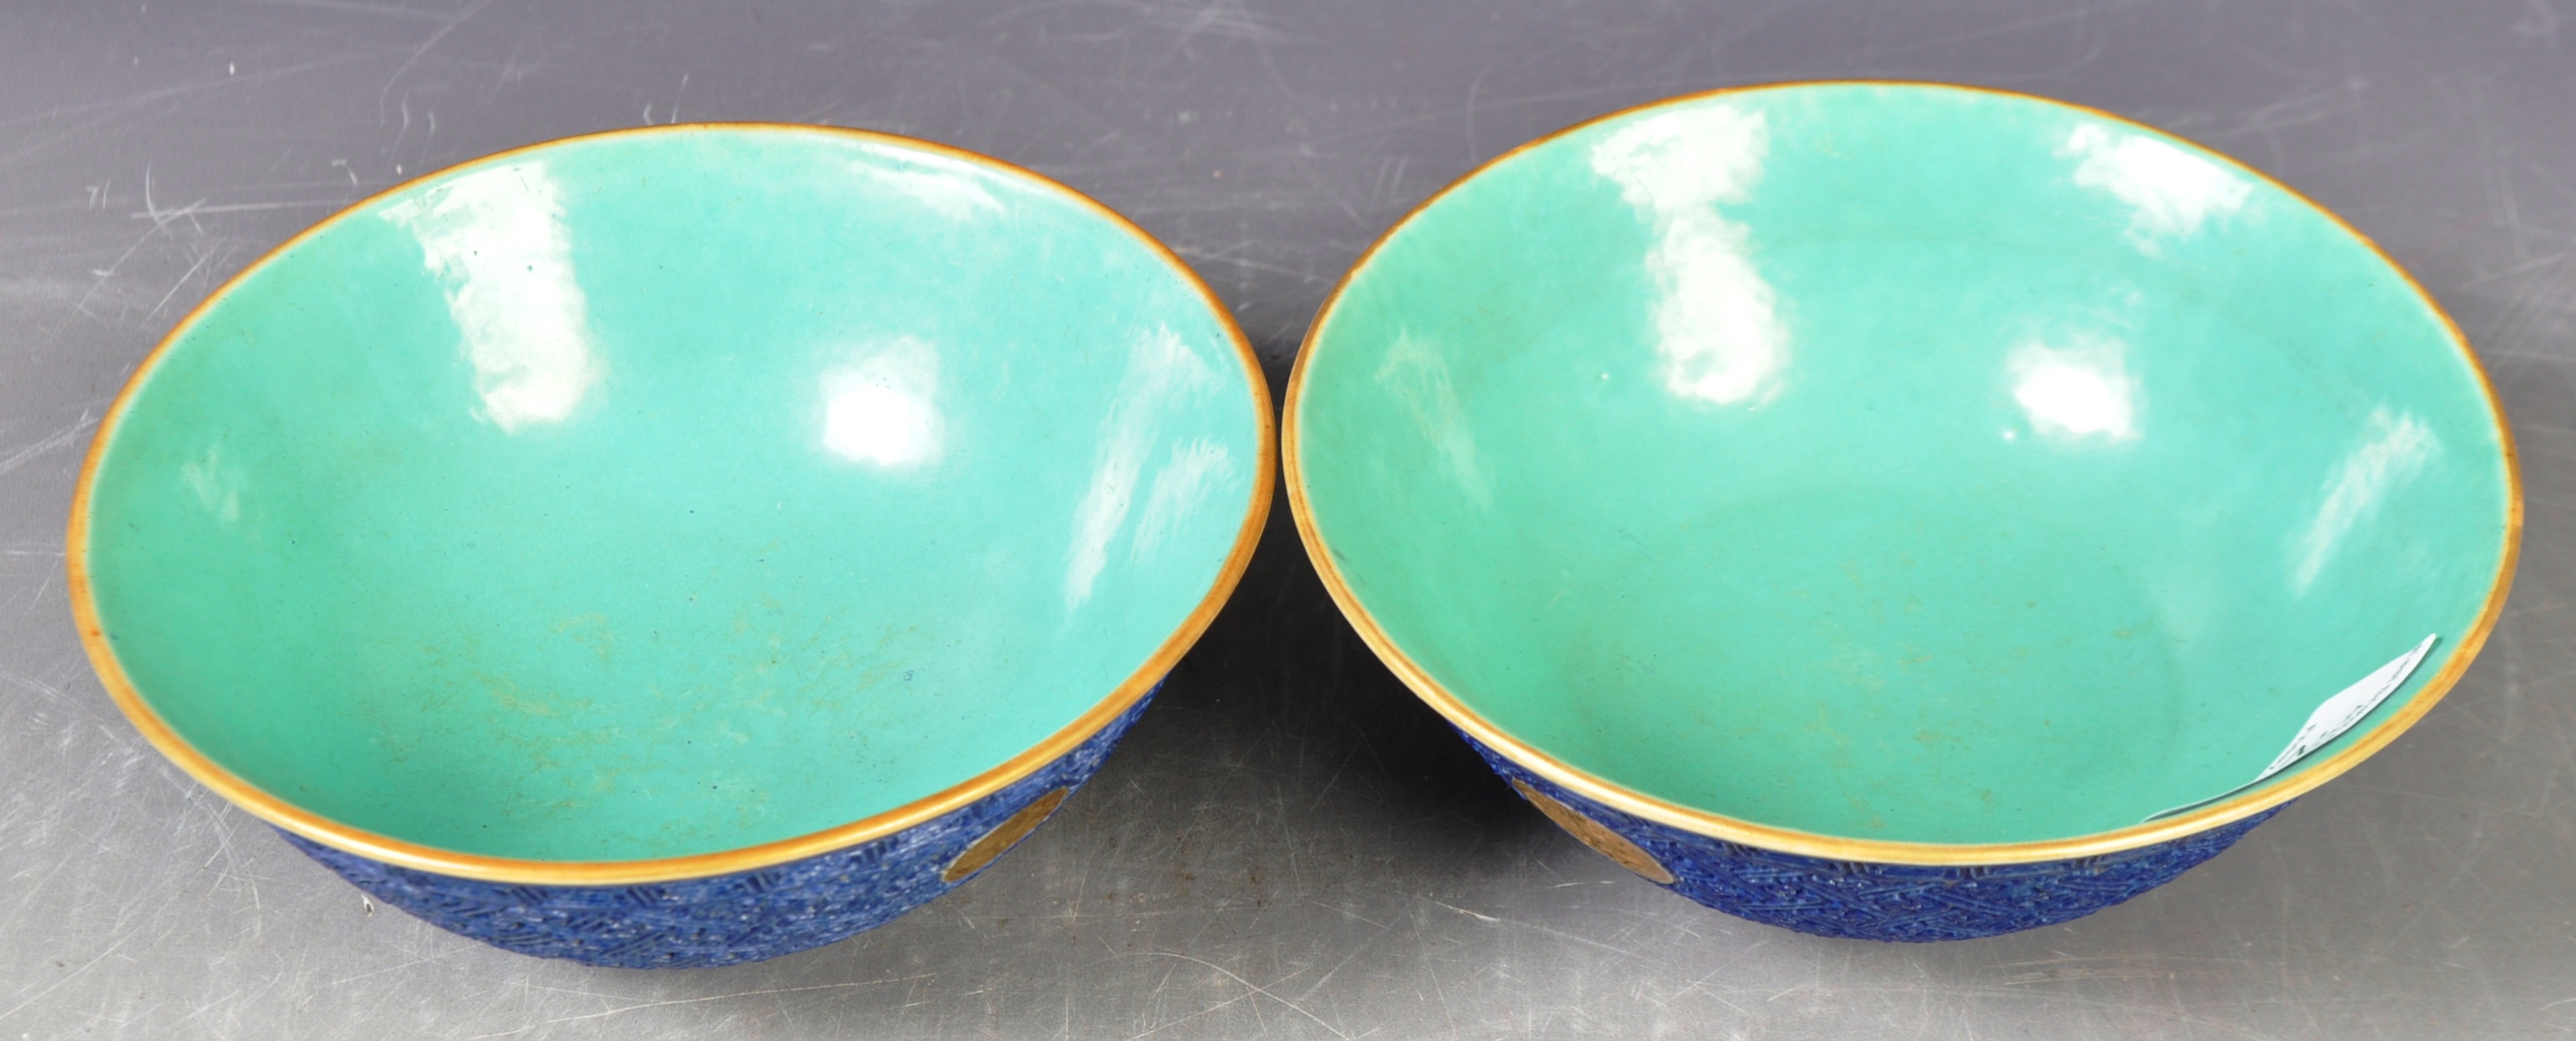 MATCHING PAIR OF 19TH CENTURY CHINESE PAINTED BOWLS - Image 2 of 8